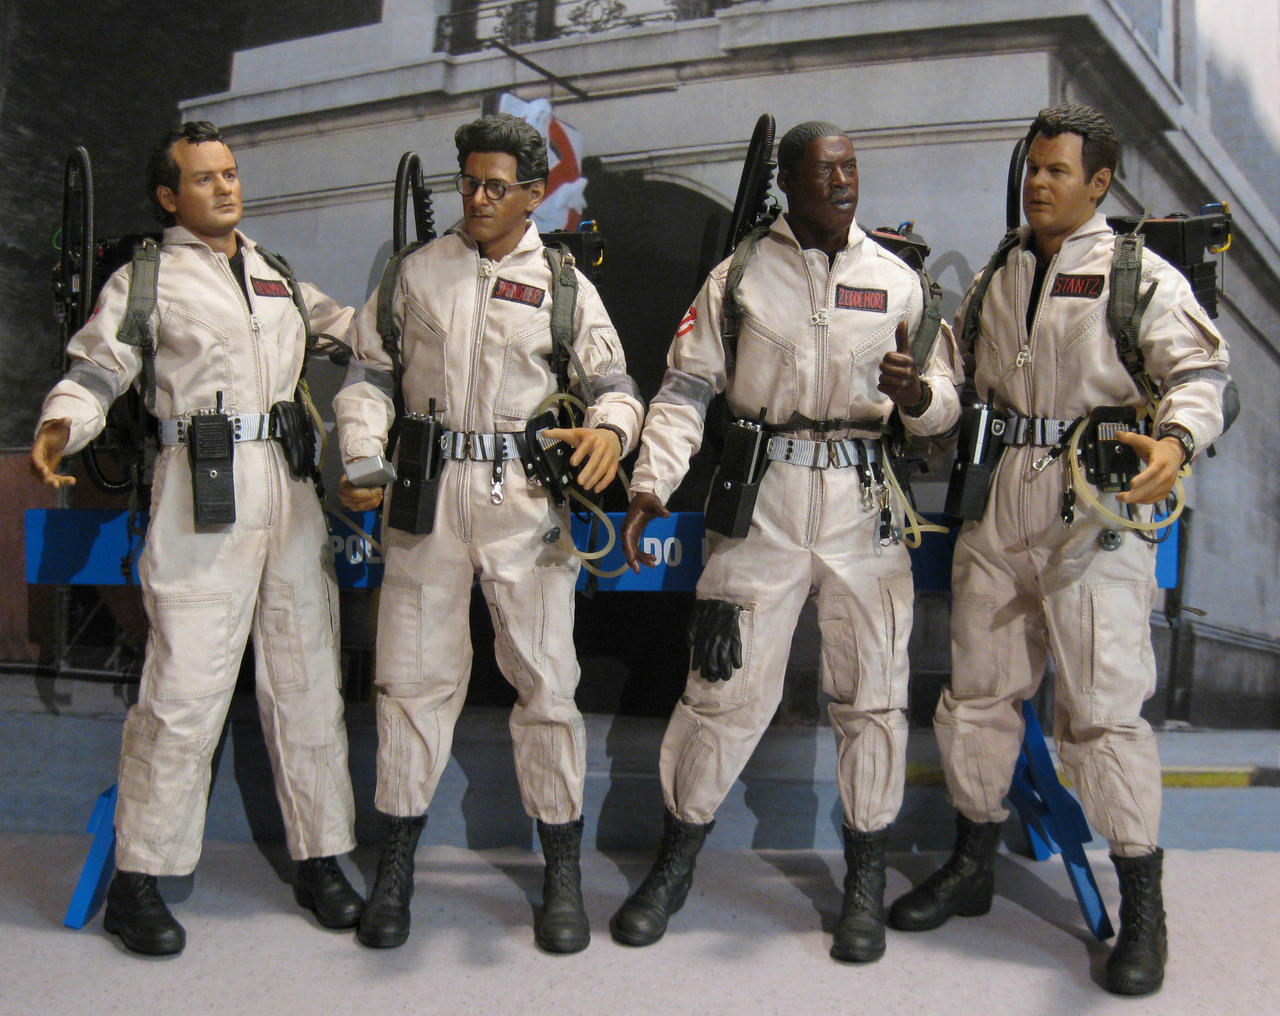 ghostbusters_ready_for_action_by_thedollknight-dbwfdvc.jpg